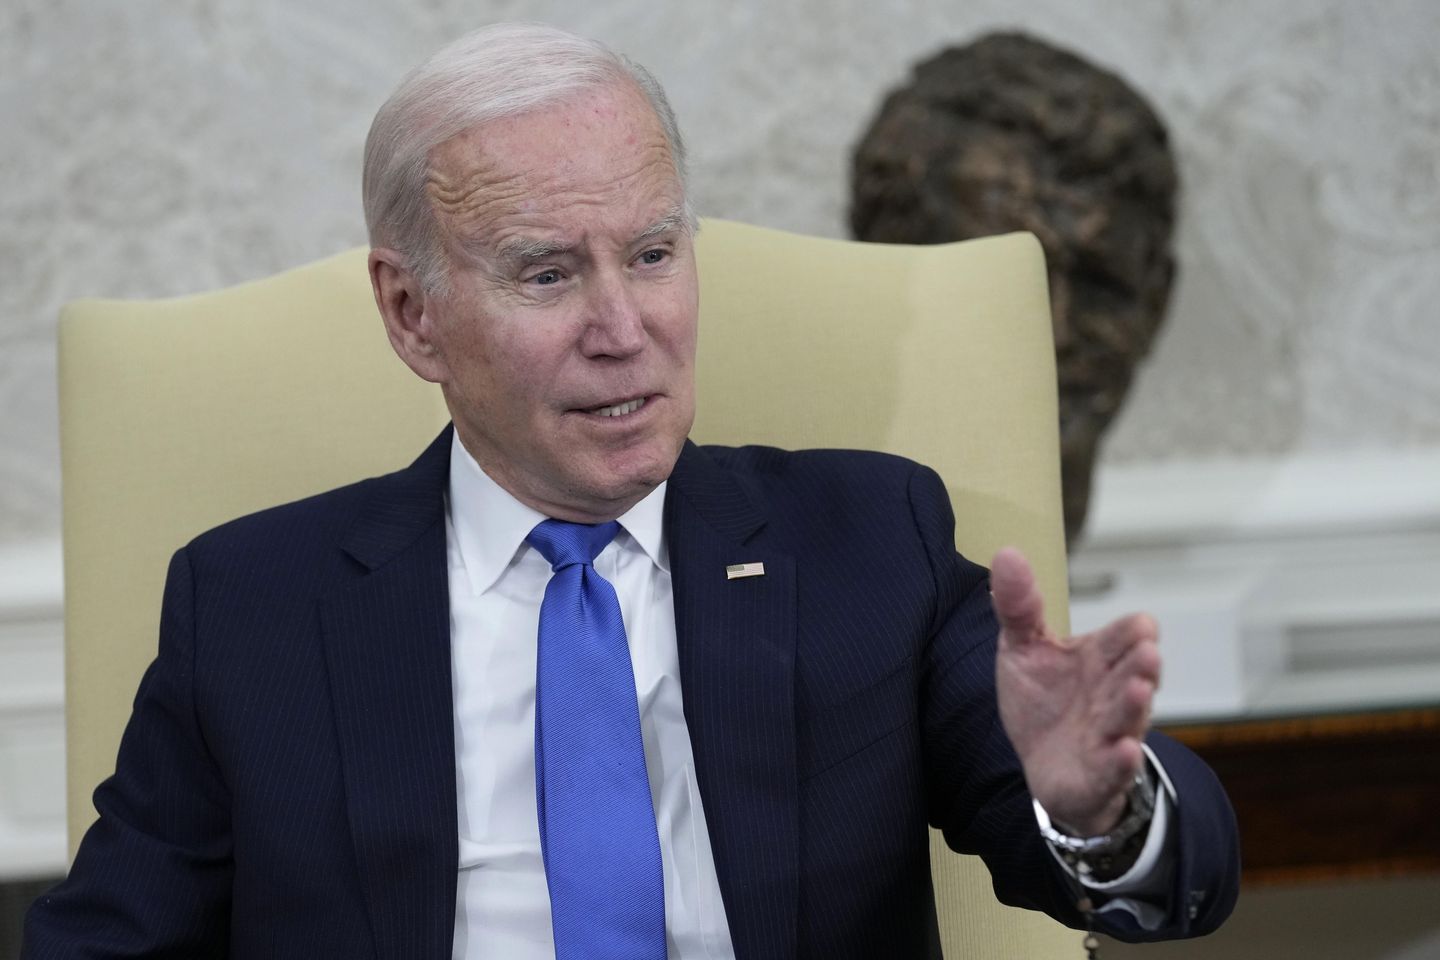 Black lawmakers put Biden on the spot to deliver new policing laws